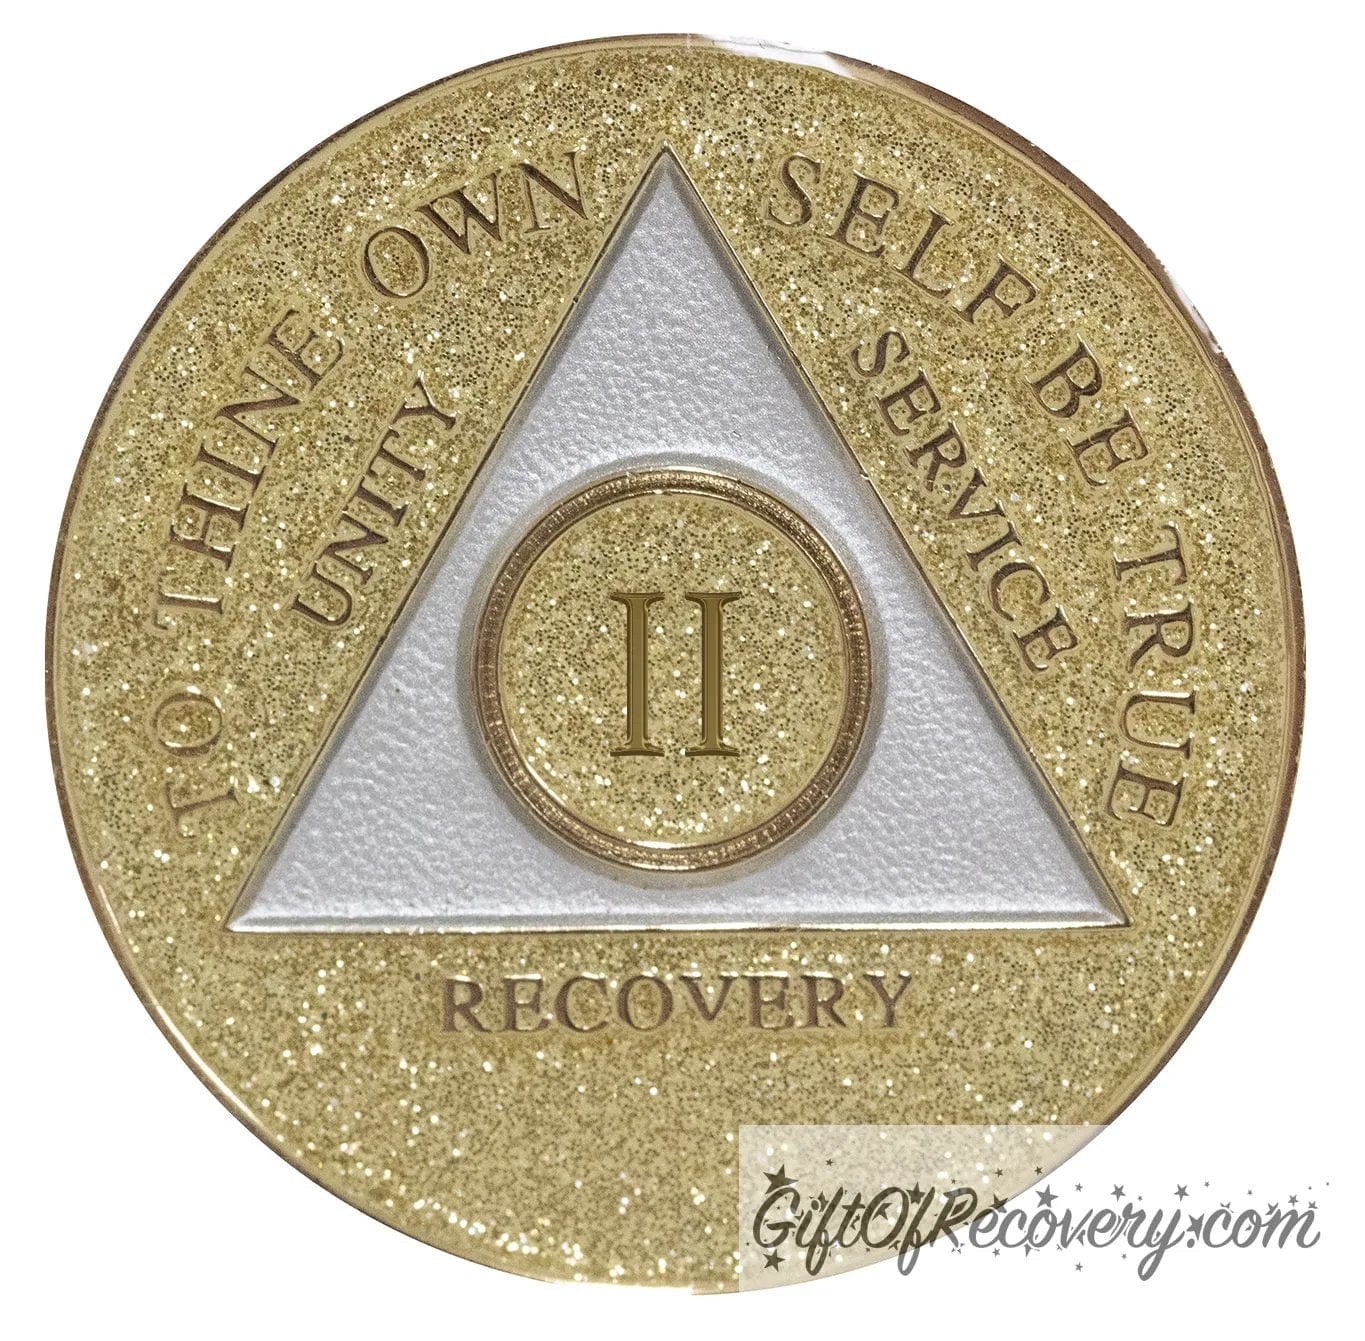 2 year AA medallion Gold glitter, with the triangle pearl white and to thine own self be true, unity, service, recovery, and the roman numeral embossed with 14k gold-plated brass, the recovery medallion is sealed with resin for a shiny finish that will last and is scratch proof.